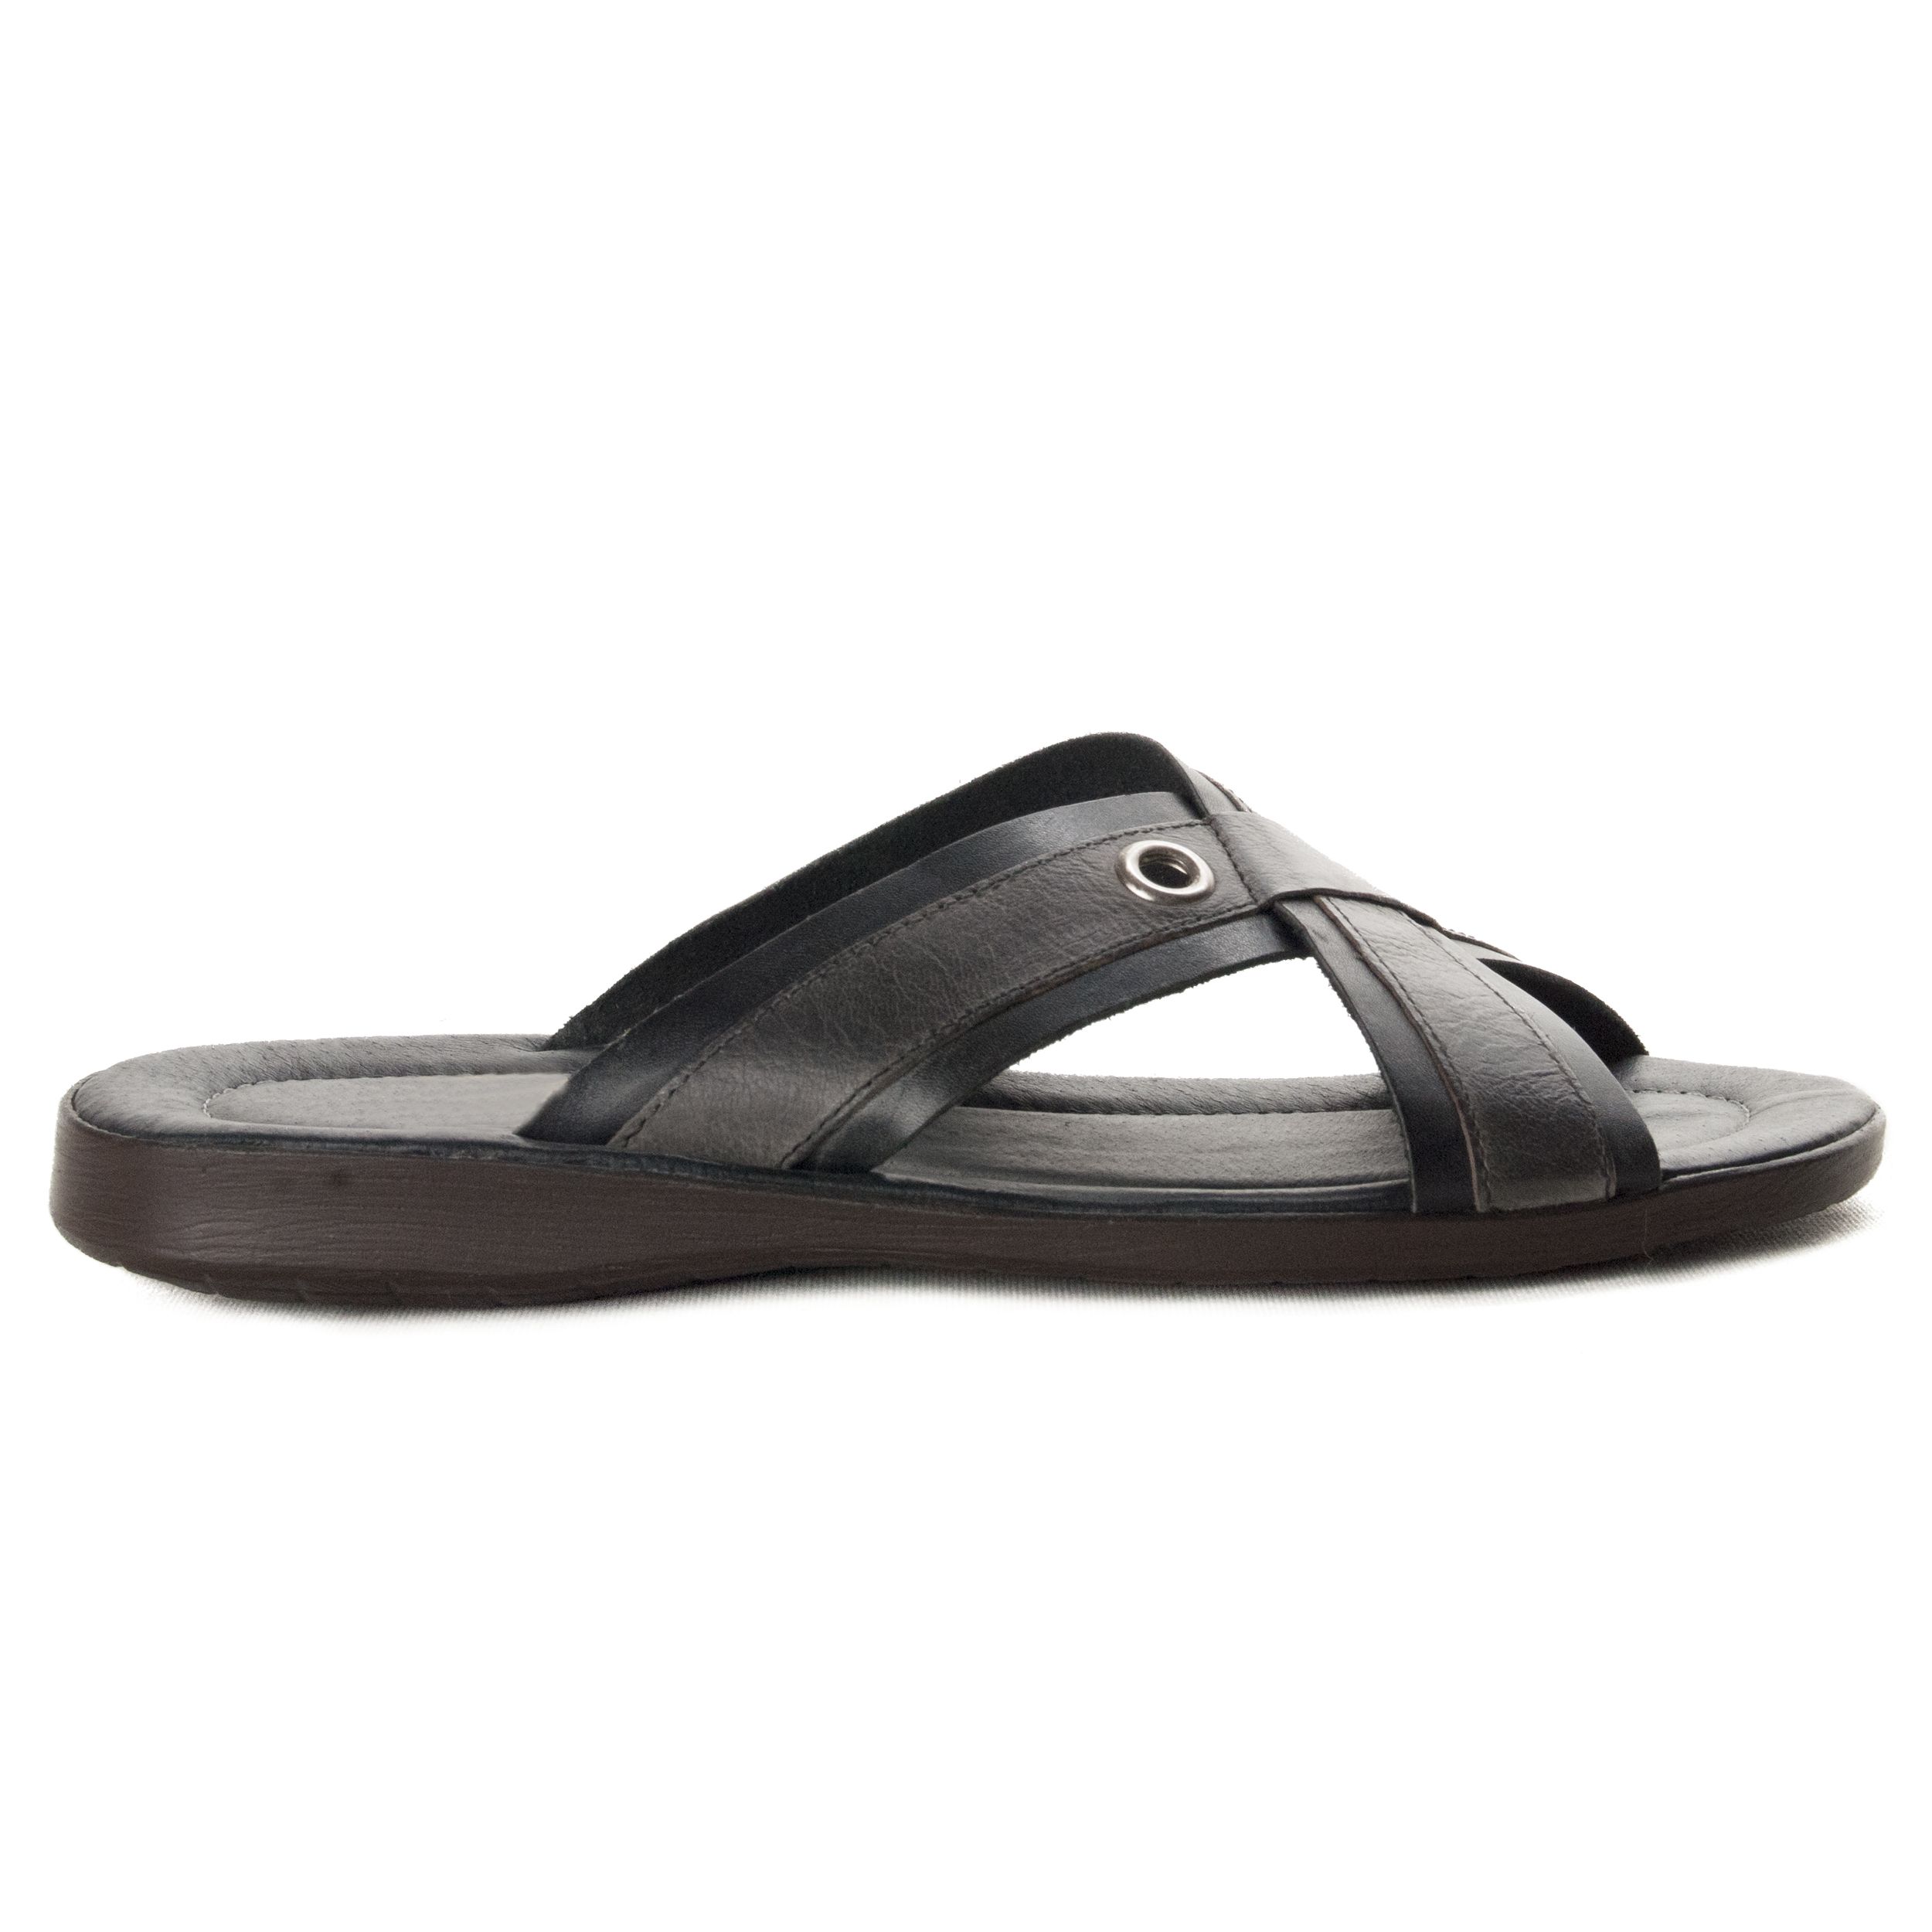 Men's skin sandal, with maximum comfort on the floor, by its gel, soft and padded template. Anatomical Coast of two crossed strips in front. Very summer for his style. Made in Spain,